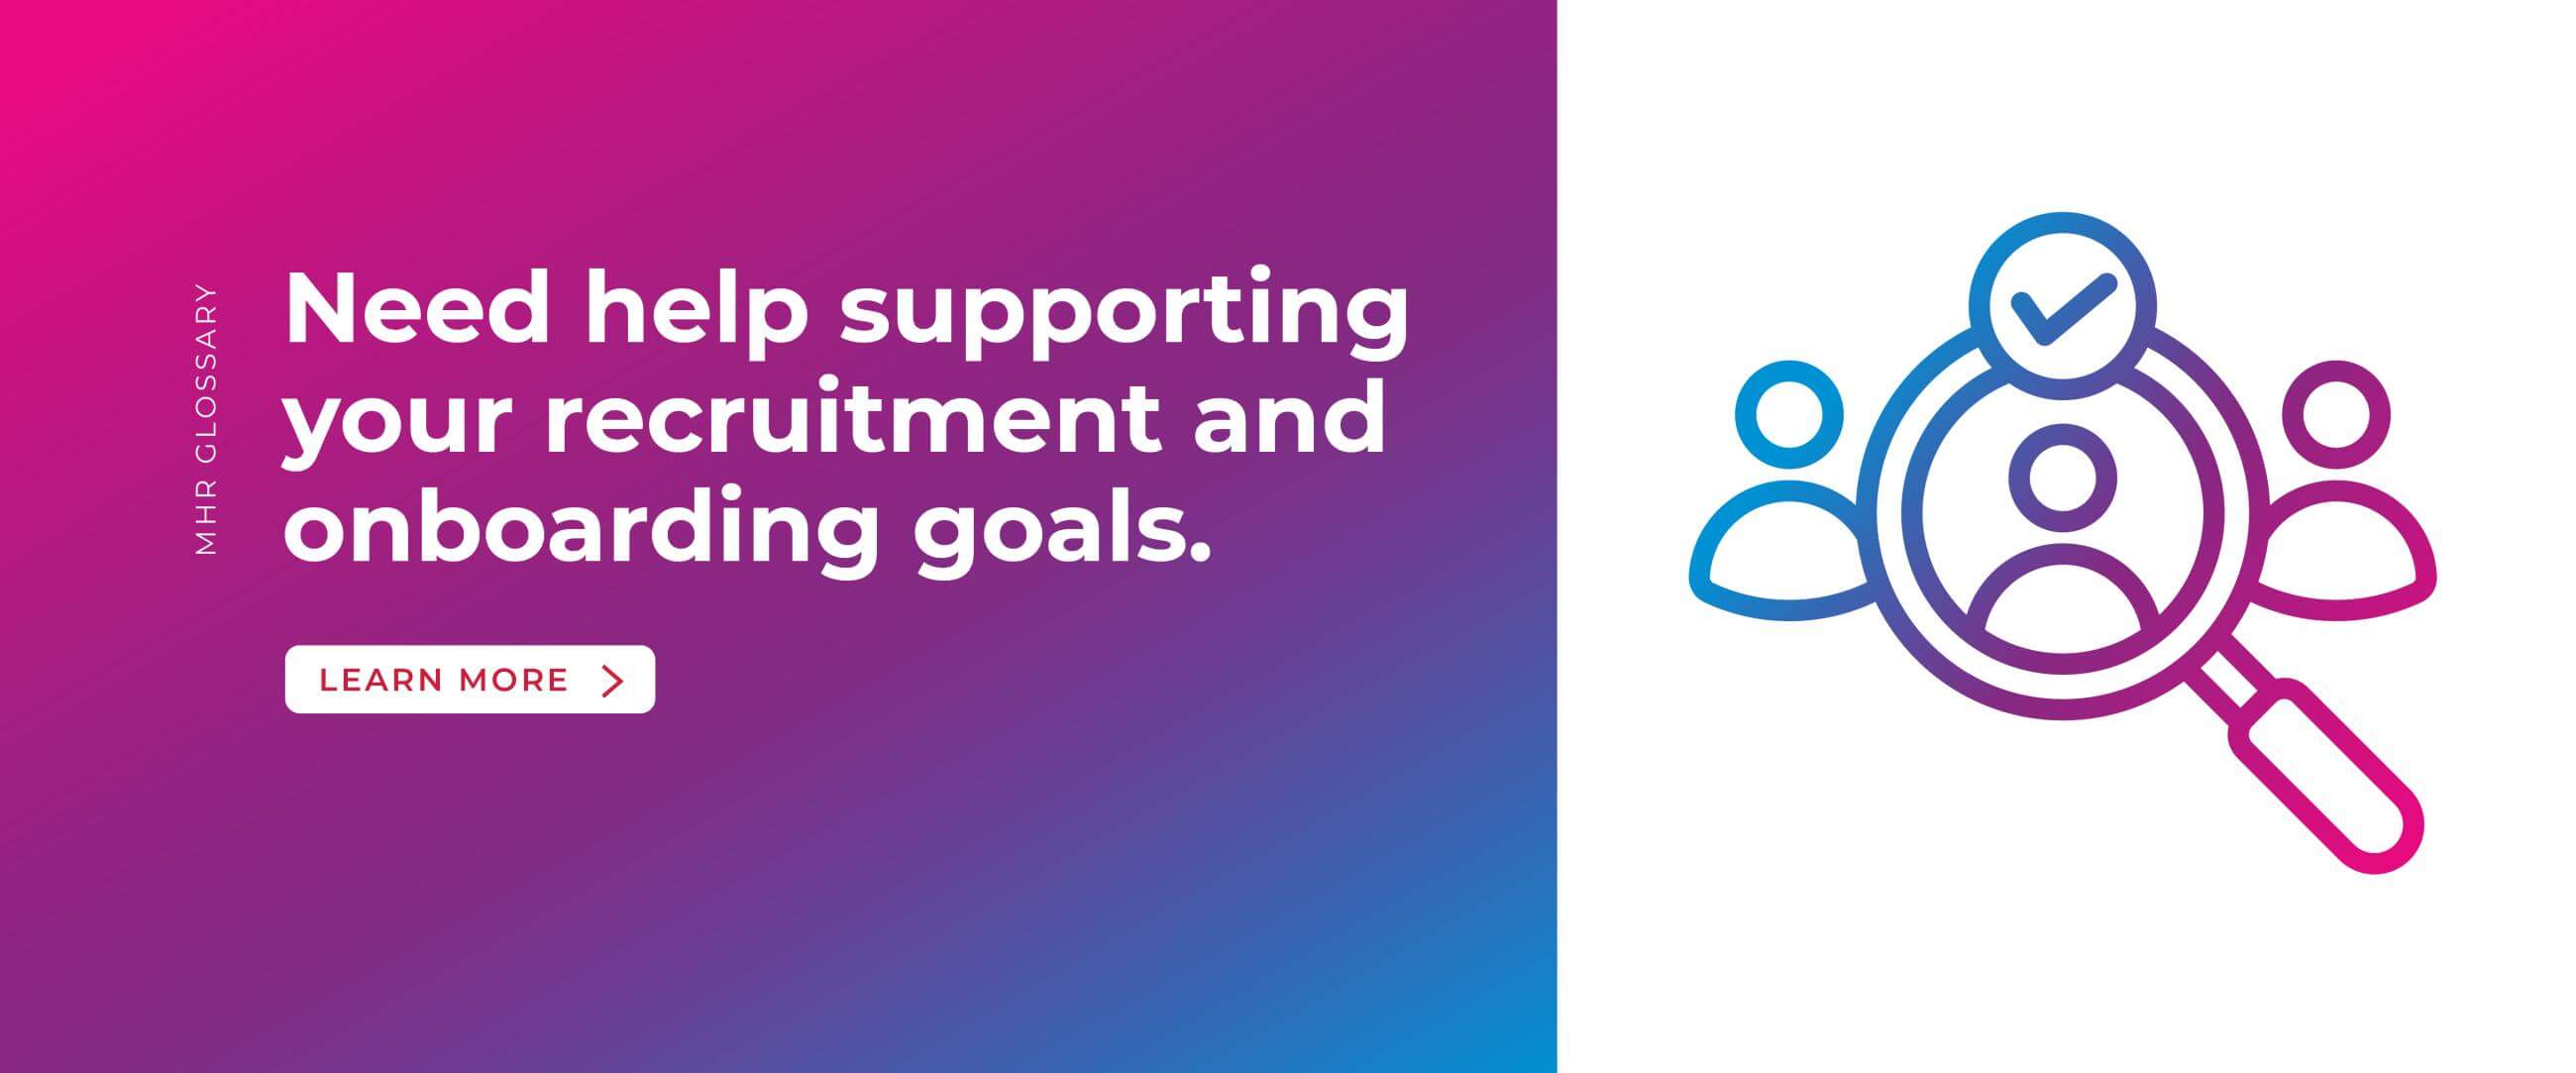 Need help supporting your recruitment and onboarding goals.